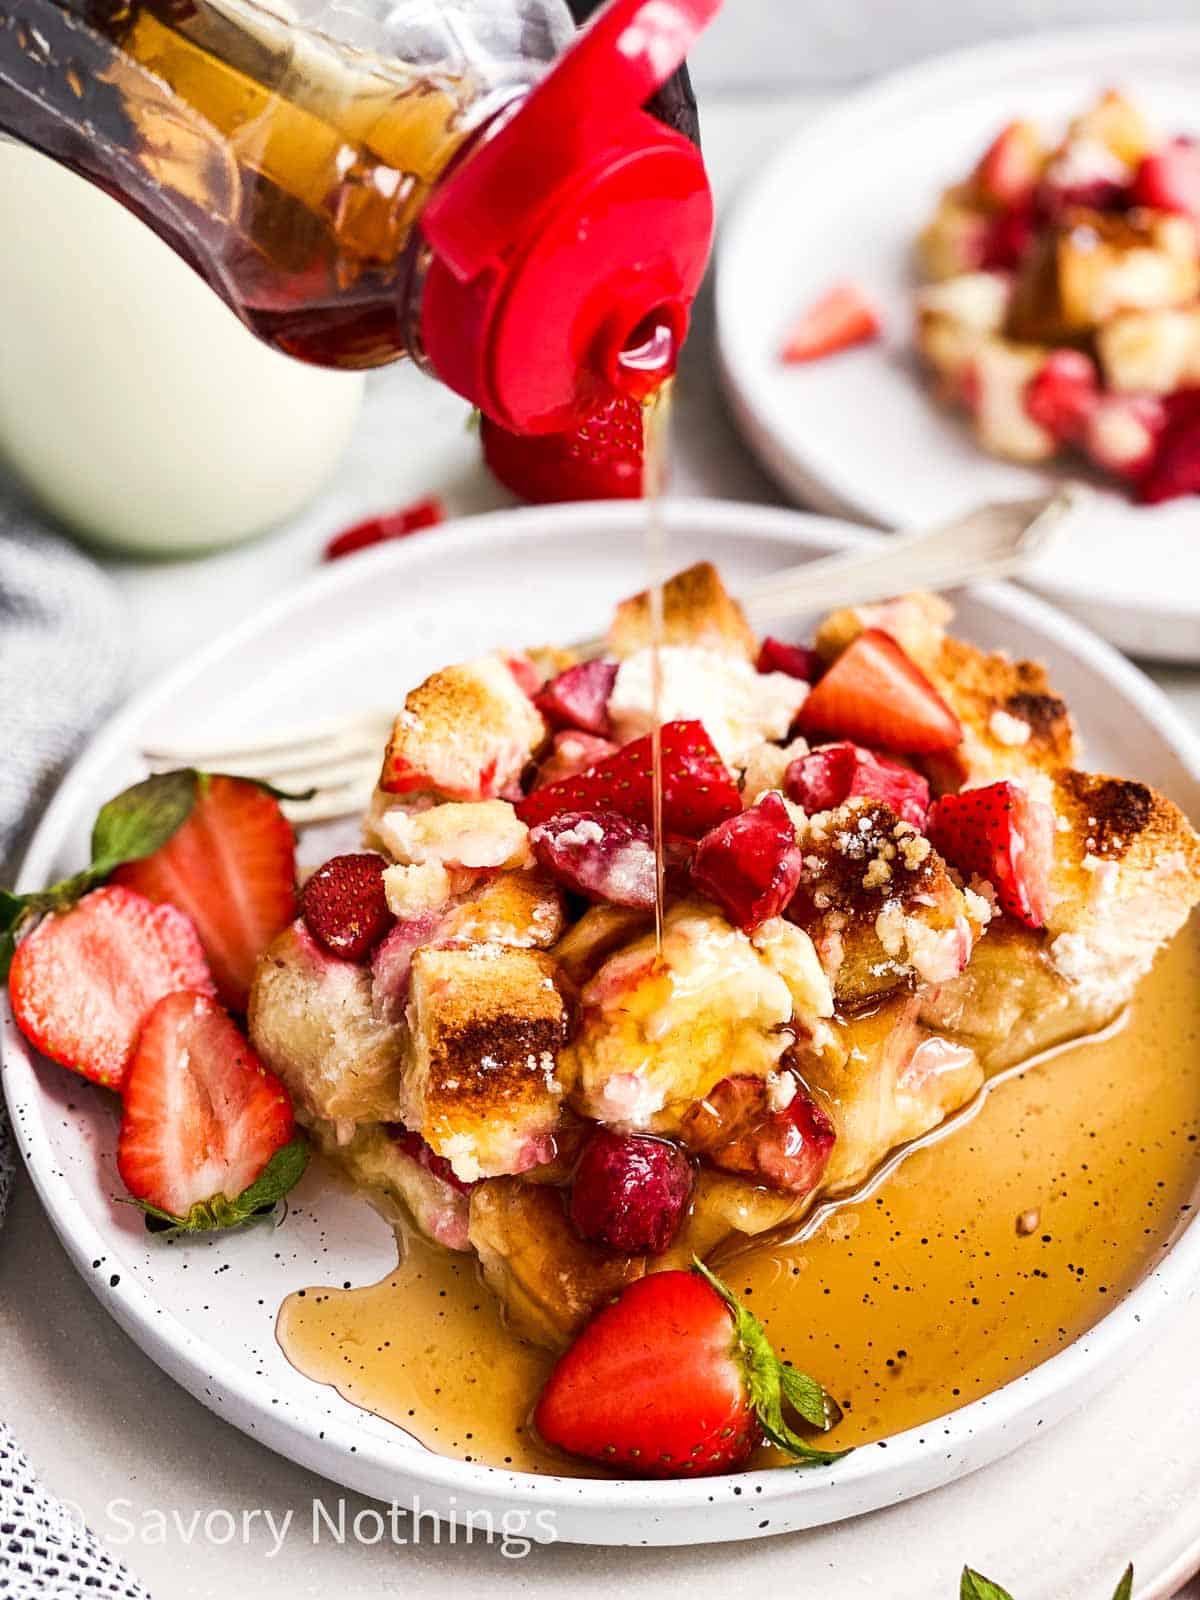 syrup pouring over slice of strawberry French toast casserole on white plate